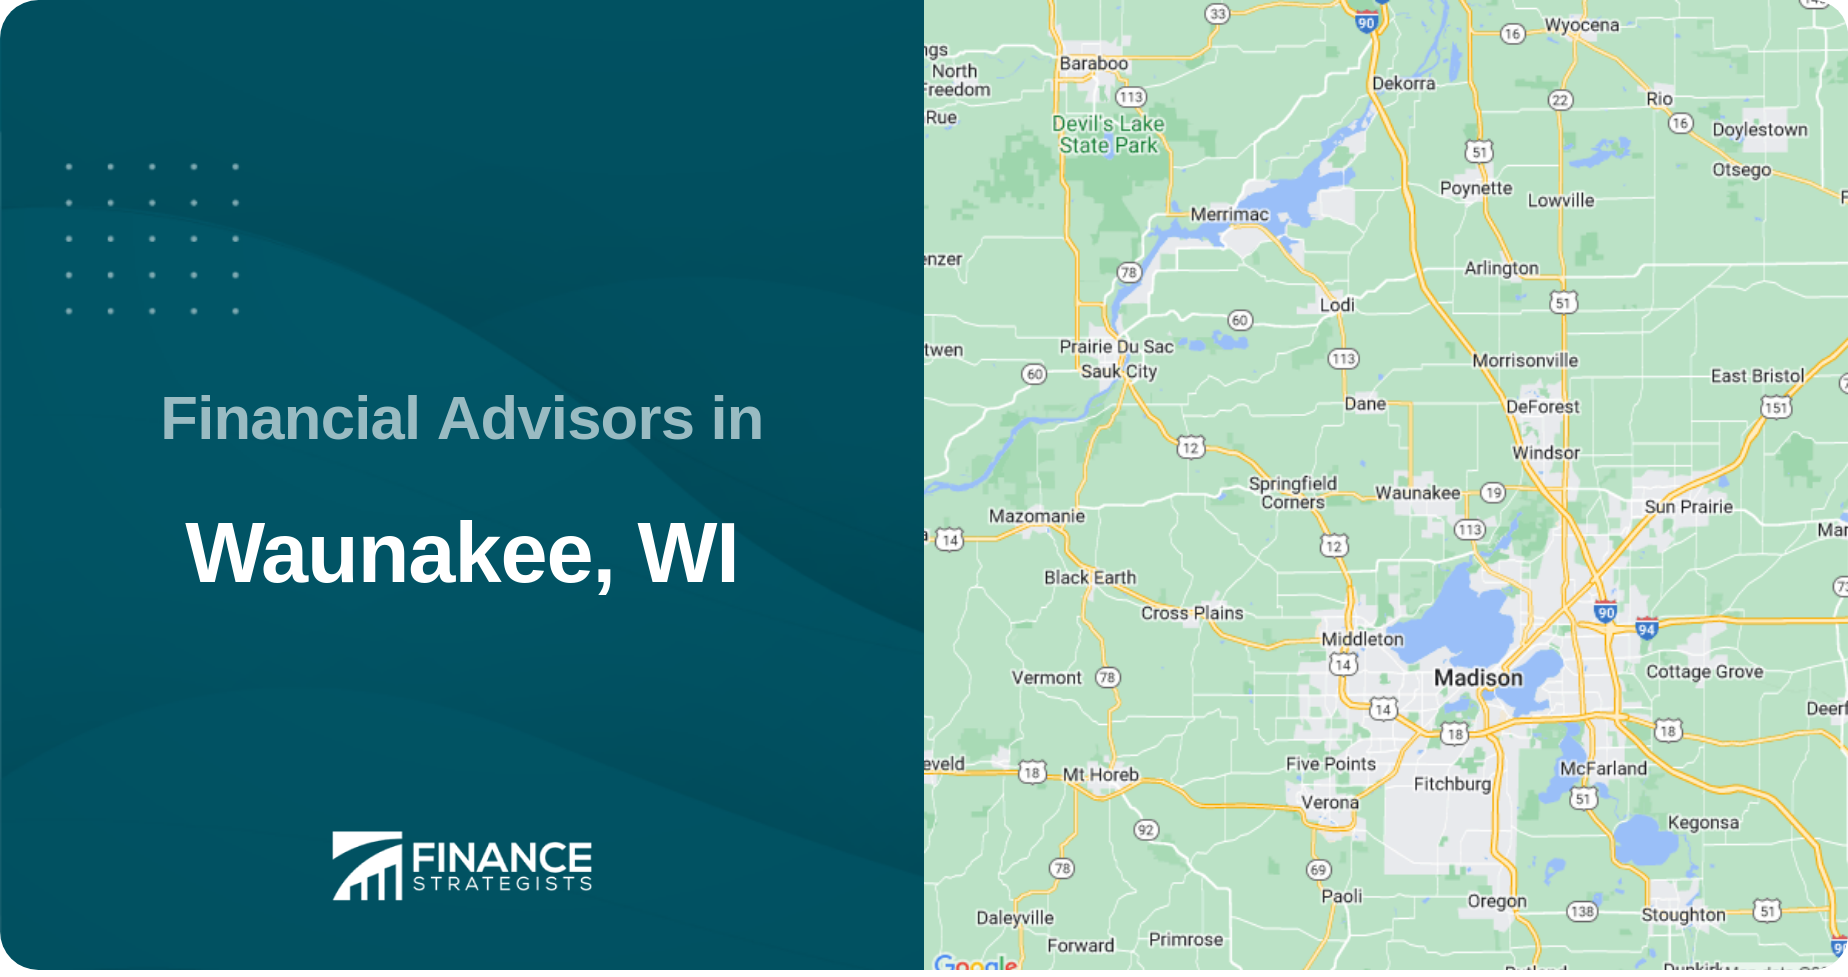 Financial Advisors in Waunakee, WI